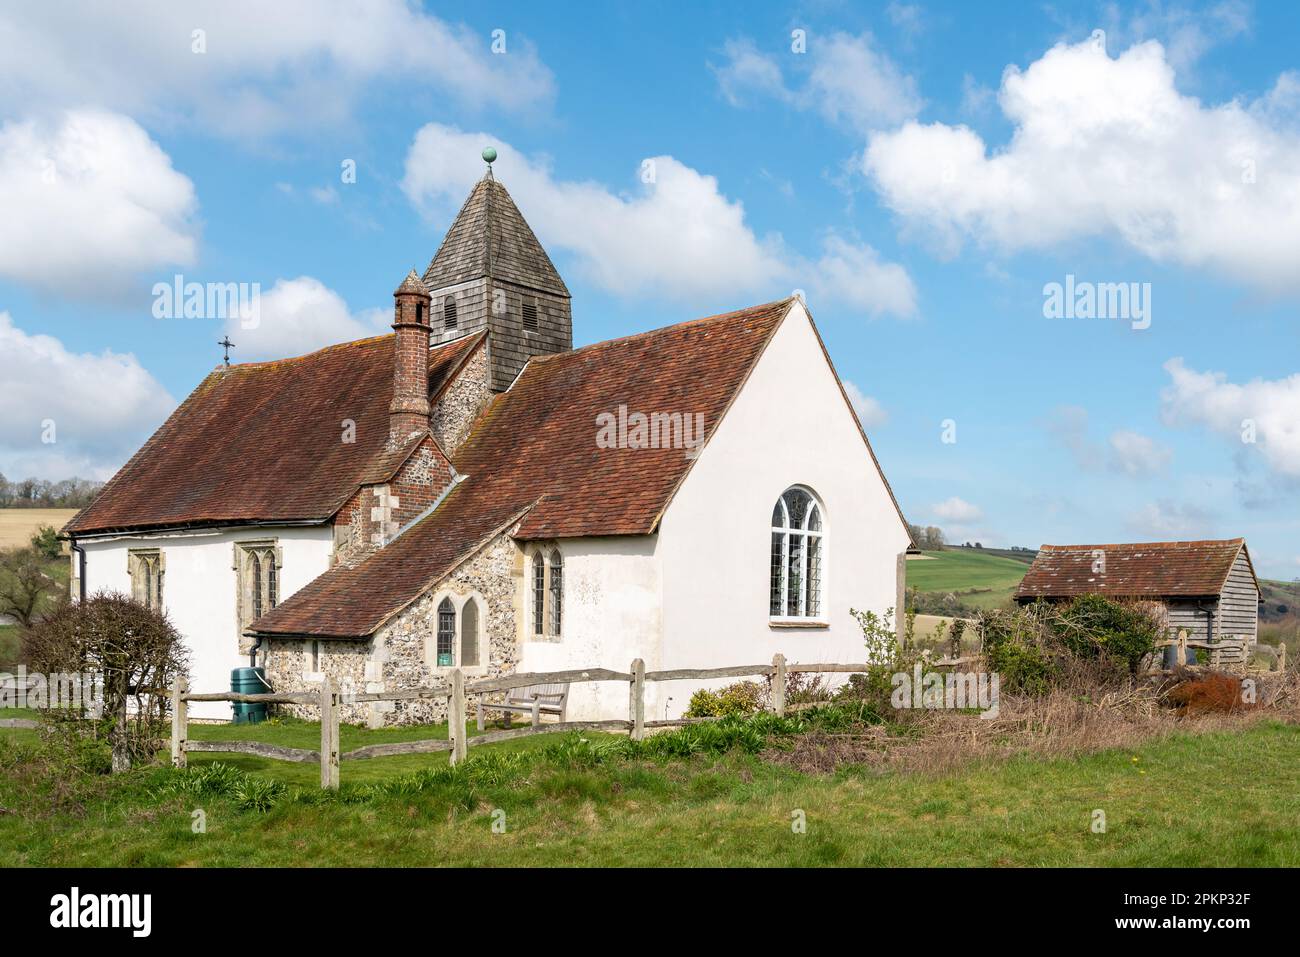 St Hubert’s Church in Idsworth, Hampshire, England. An 11th century Anglican church standing alone in the English countryside.  April 8th 2023. Stock Photo